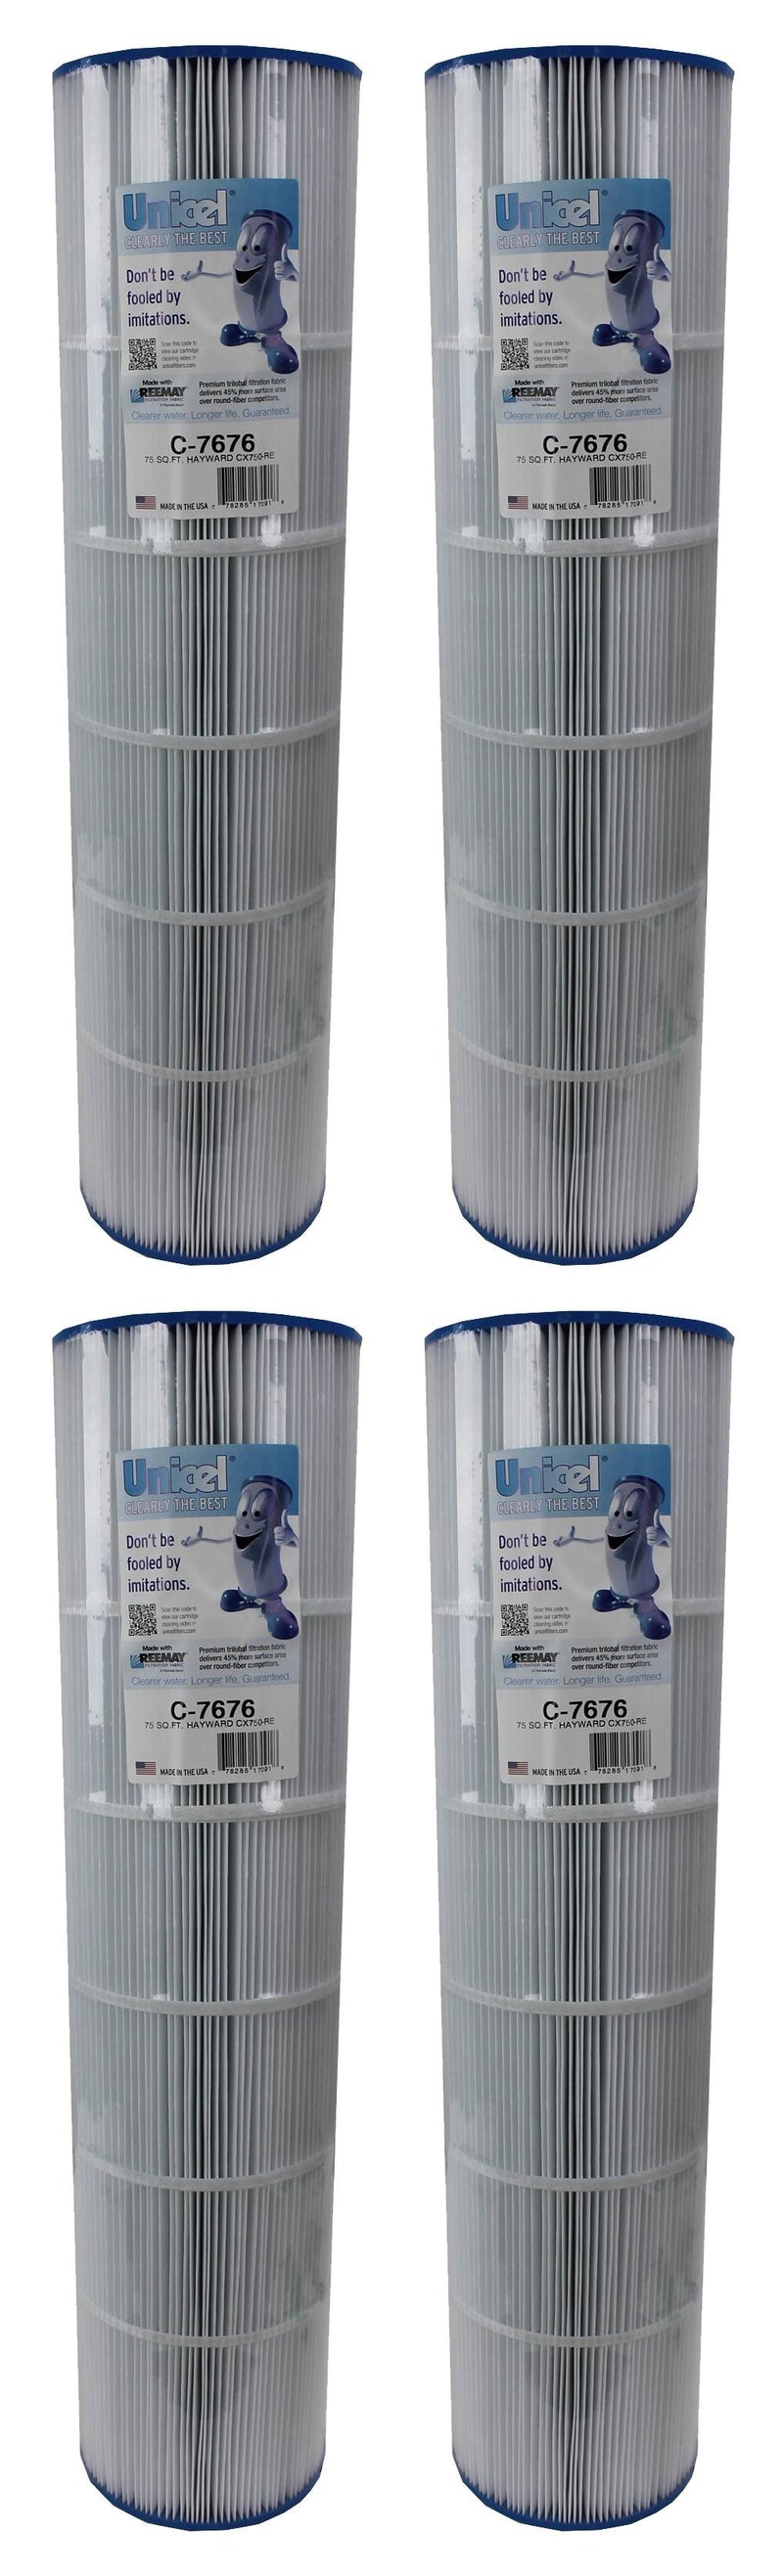 Unicel C-7676 Replacement 75 Sq Ft Pool Spa Filter Cartridge, 108 Pleats, 4 Pack